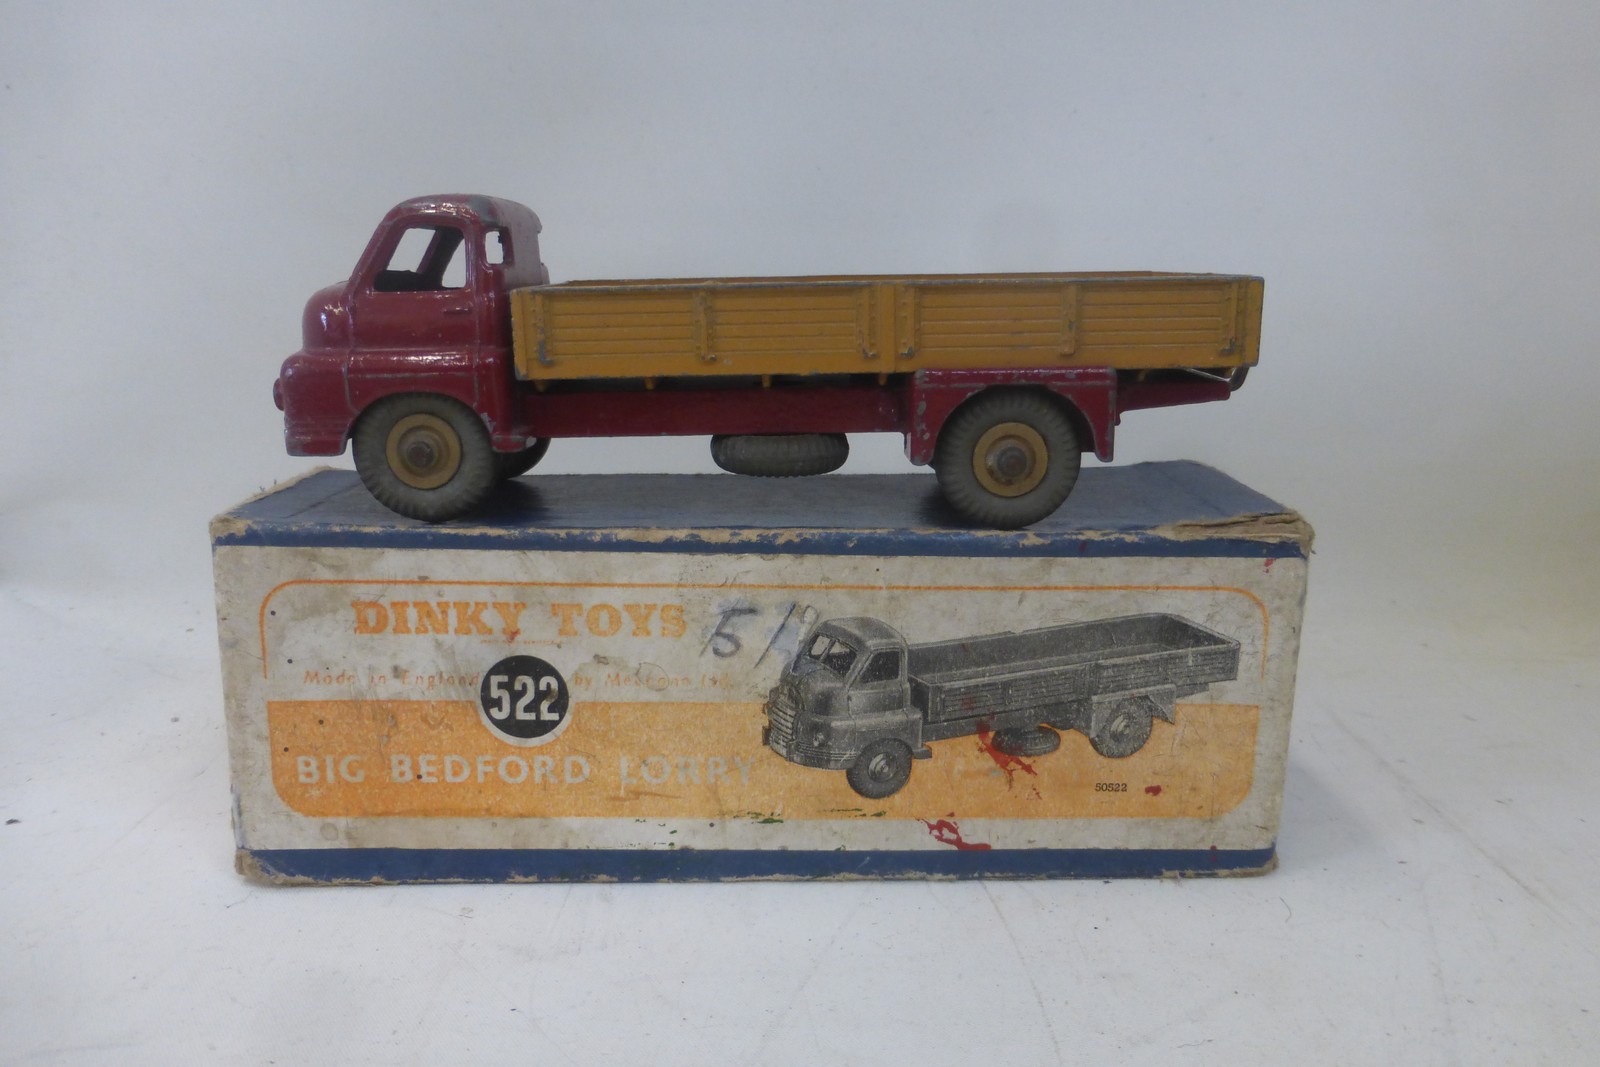 DINKY TOYS - Big Bedford Lorry, no. 522, fair condition; early blue box with orange label fair.